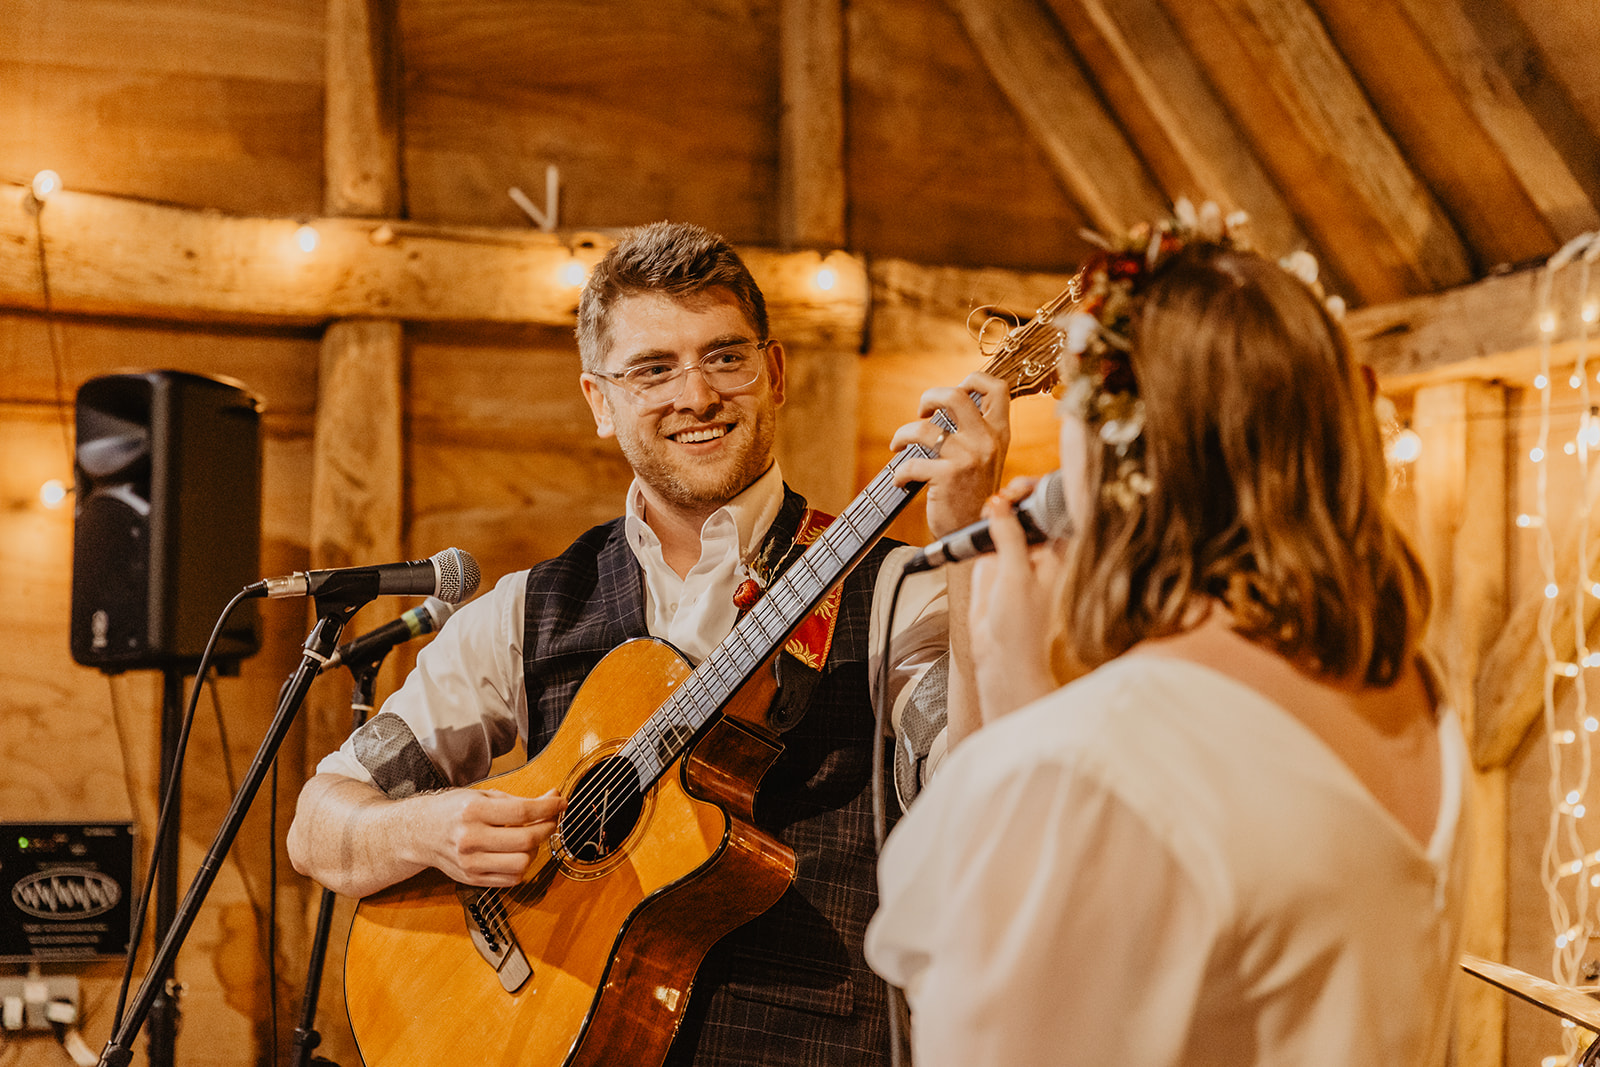 Bride and Groom singing to each other at a wedding at Gilbert White's Hampshire. By OliveJoy Photography.